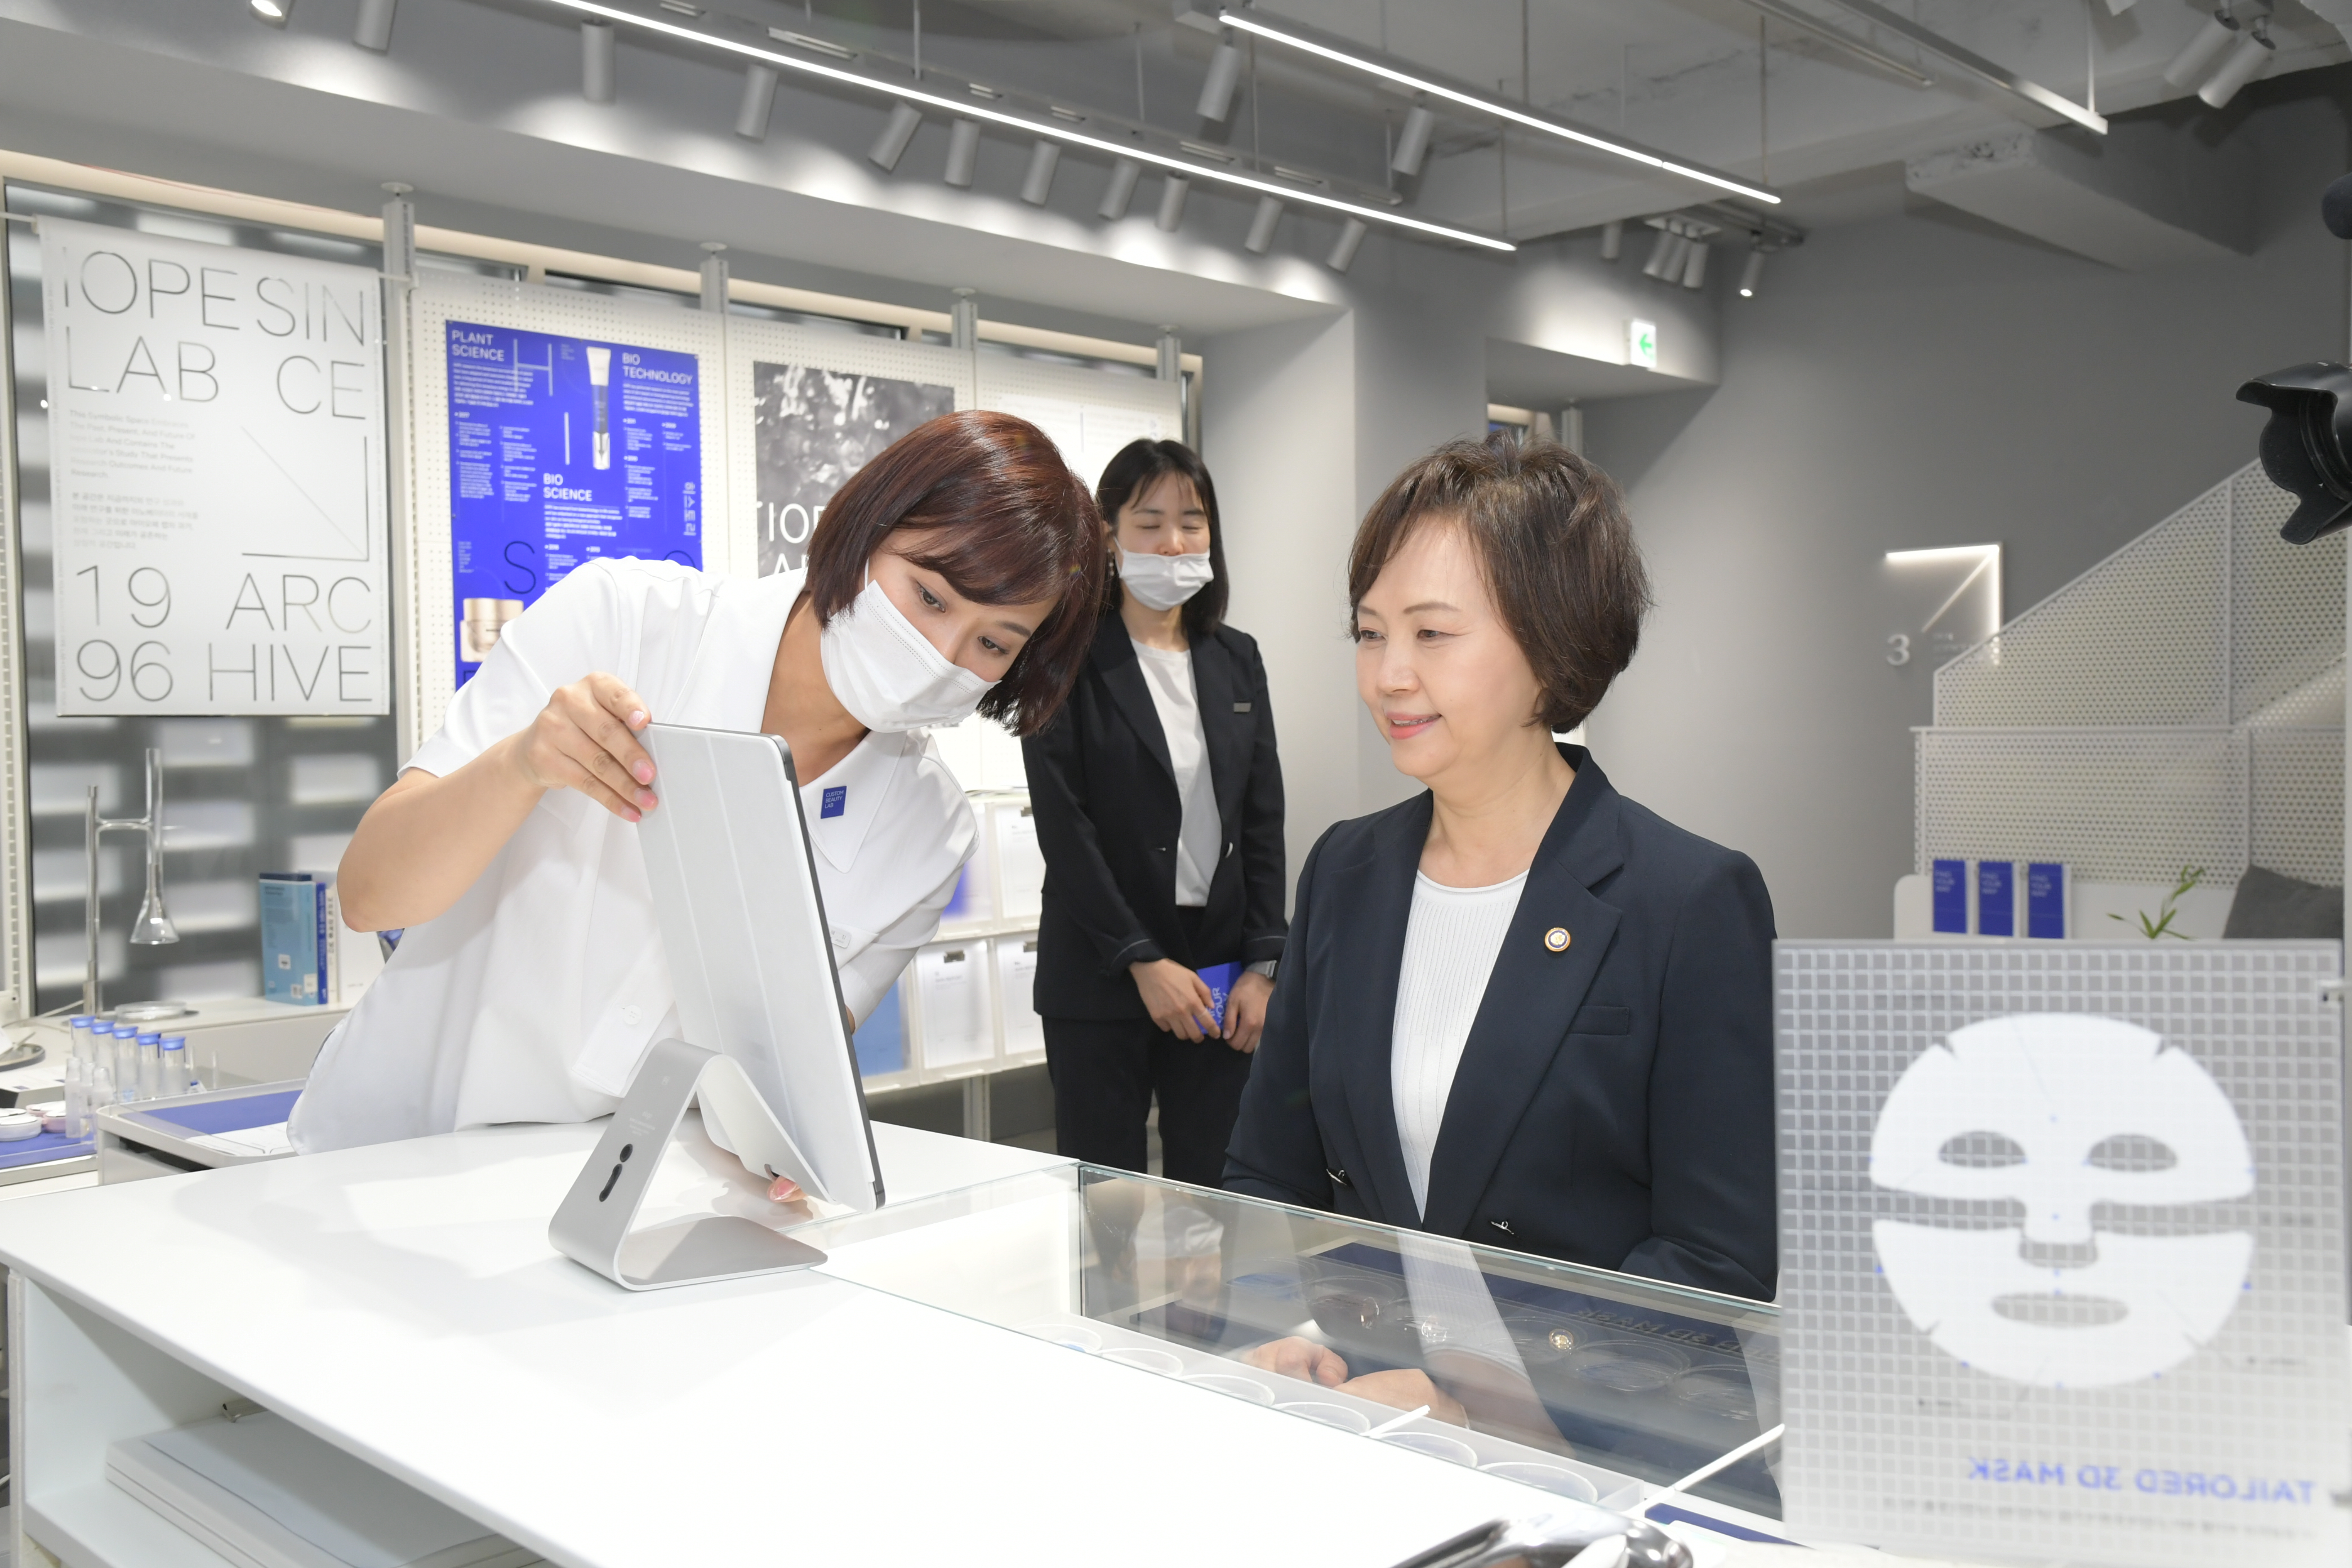 Photo News4 - [May 29, 2020] Minister of Food and Drug Safety visits customized cosmetics lab and attends CEO Meeting